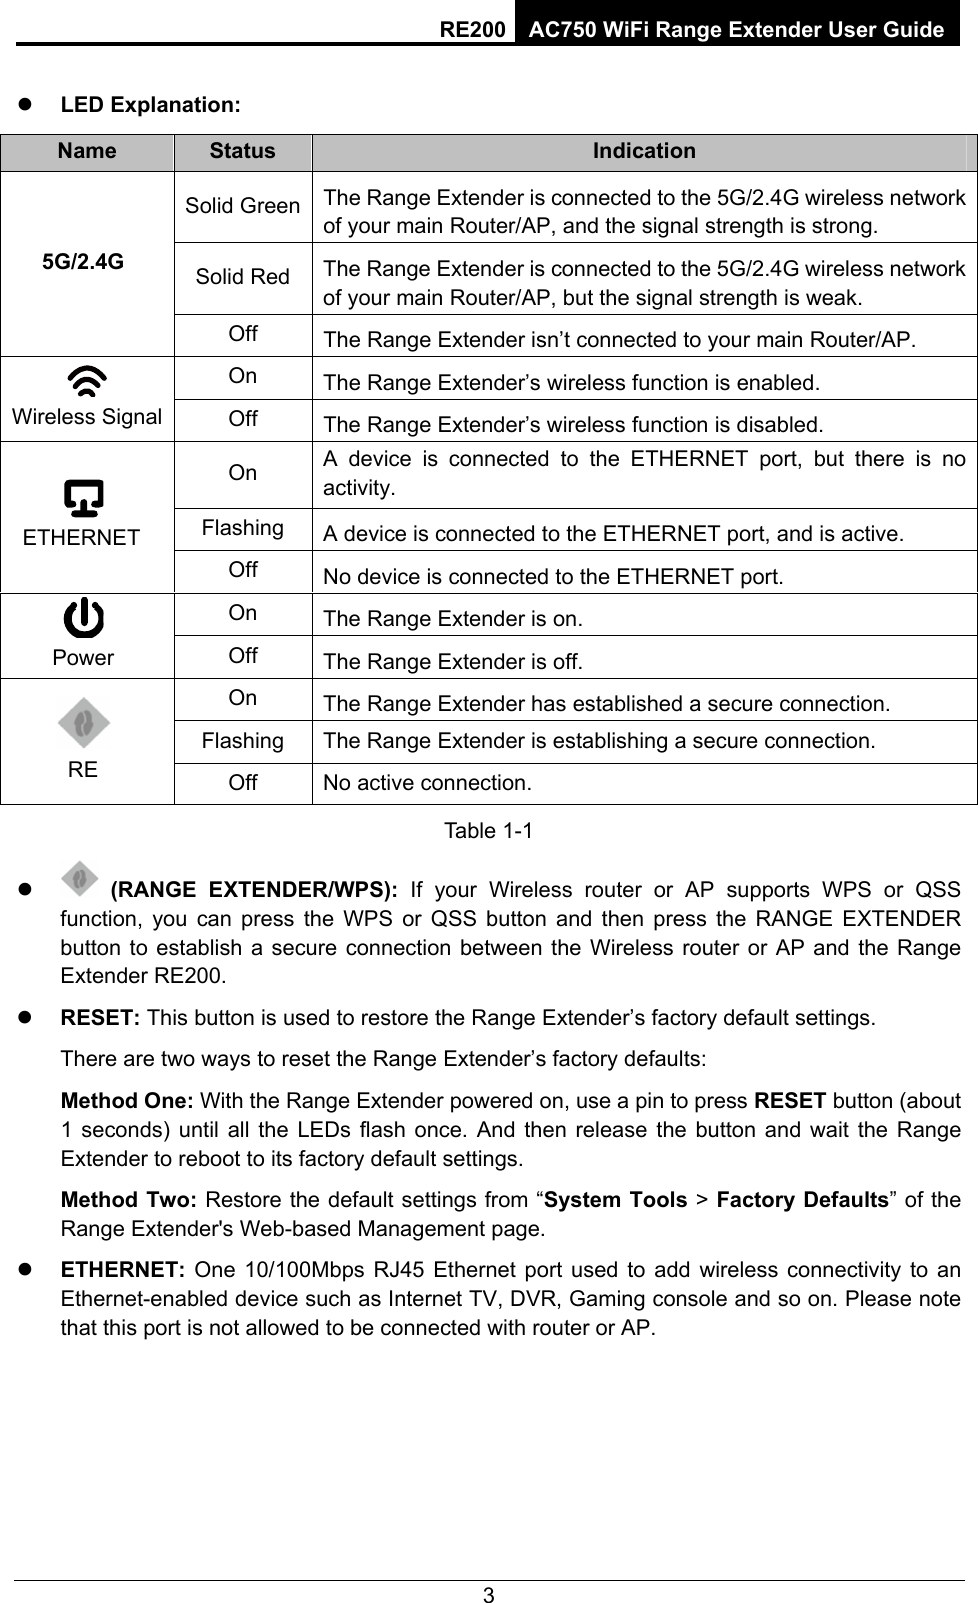 RE200 AC750 WiFi Range Extender User Guide z LED Explanation: Name  Status  Indication Solid Green  The Range Extender is connected to the 5G/2.4G wireless network of your main Router/AP, and the signal strength is strong. Solid Red  The Range Extender is connected to the 5G/2.4G wireless network of your main Router/AP, but the signal strength is weak. 5G/2.4G Off  The Range Extender isn’t connected to your main Router/AP. On  The Range Extender’s wireless function is enabled.  Wireless Signal  Off  The Range Extender’s wireless function is disabled. On  A device is connected to the ETHERNET port, but there is no activity. Flashing  A device is connected to the ETHERNET port, and is active.  ETHERNET Off  No device is connected to the ETHERNET port. On   The Range Extender is on.  Power  Off  The Range Extender is off. On  The Range Extender has established a secure connection. Flashing  The Range Extender is establishing a secure connection.  RE  Off  No active connection. Table 1-1 z  (RANGE EXTENDER/WPS): If your Wireless router or AP supports WPS or QSS function, you can press the WPS or QSS button and then press the RANGE EXTENDER button to establish a secure connection between the Wireless router or AP and the Range Extender RE200. z RESET: This button is used to restore the Range Extender’s factory default settings.   There are two ways to reset the Range Extender’s factory defaults:   Method One: With the Range Extender powered on, use a pin to press RESET button (about 1 seconds) until all the LEDs flash once. And then release the button and wait the Range Extender to reboot to its factory default settings.   Method Two: Restore the default settings from “System Tools &gt; Factory Defaults” of the Range Extender&apos;s Web-based Management page. z ETHERNET:  One 10/100Mbps RJ45 Ethernet port used to add wireless connectivity to an Ethernet-enabled device such as Internet TV, DVR, Gaming console and so on. Please note that this port is not allowed to be connected with router or AP. 3 